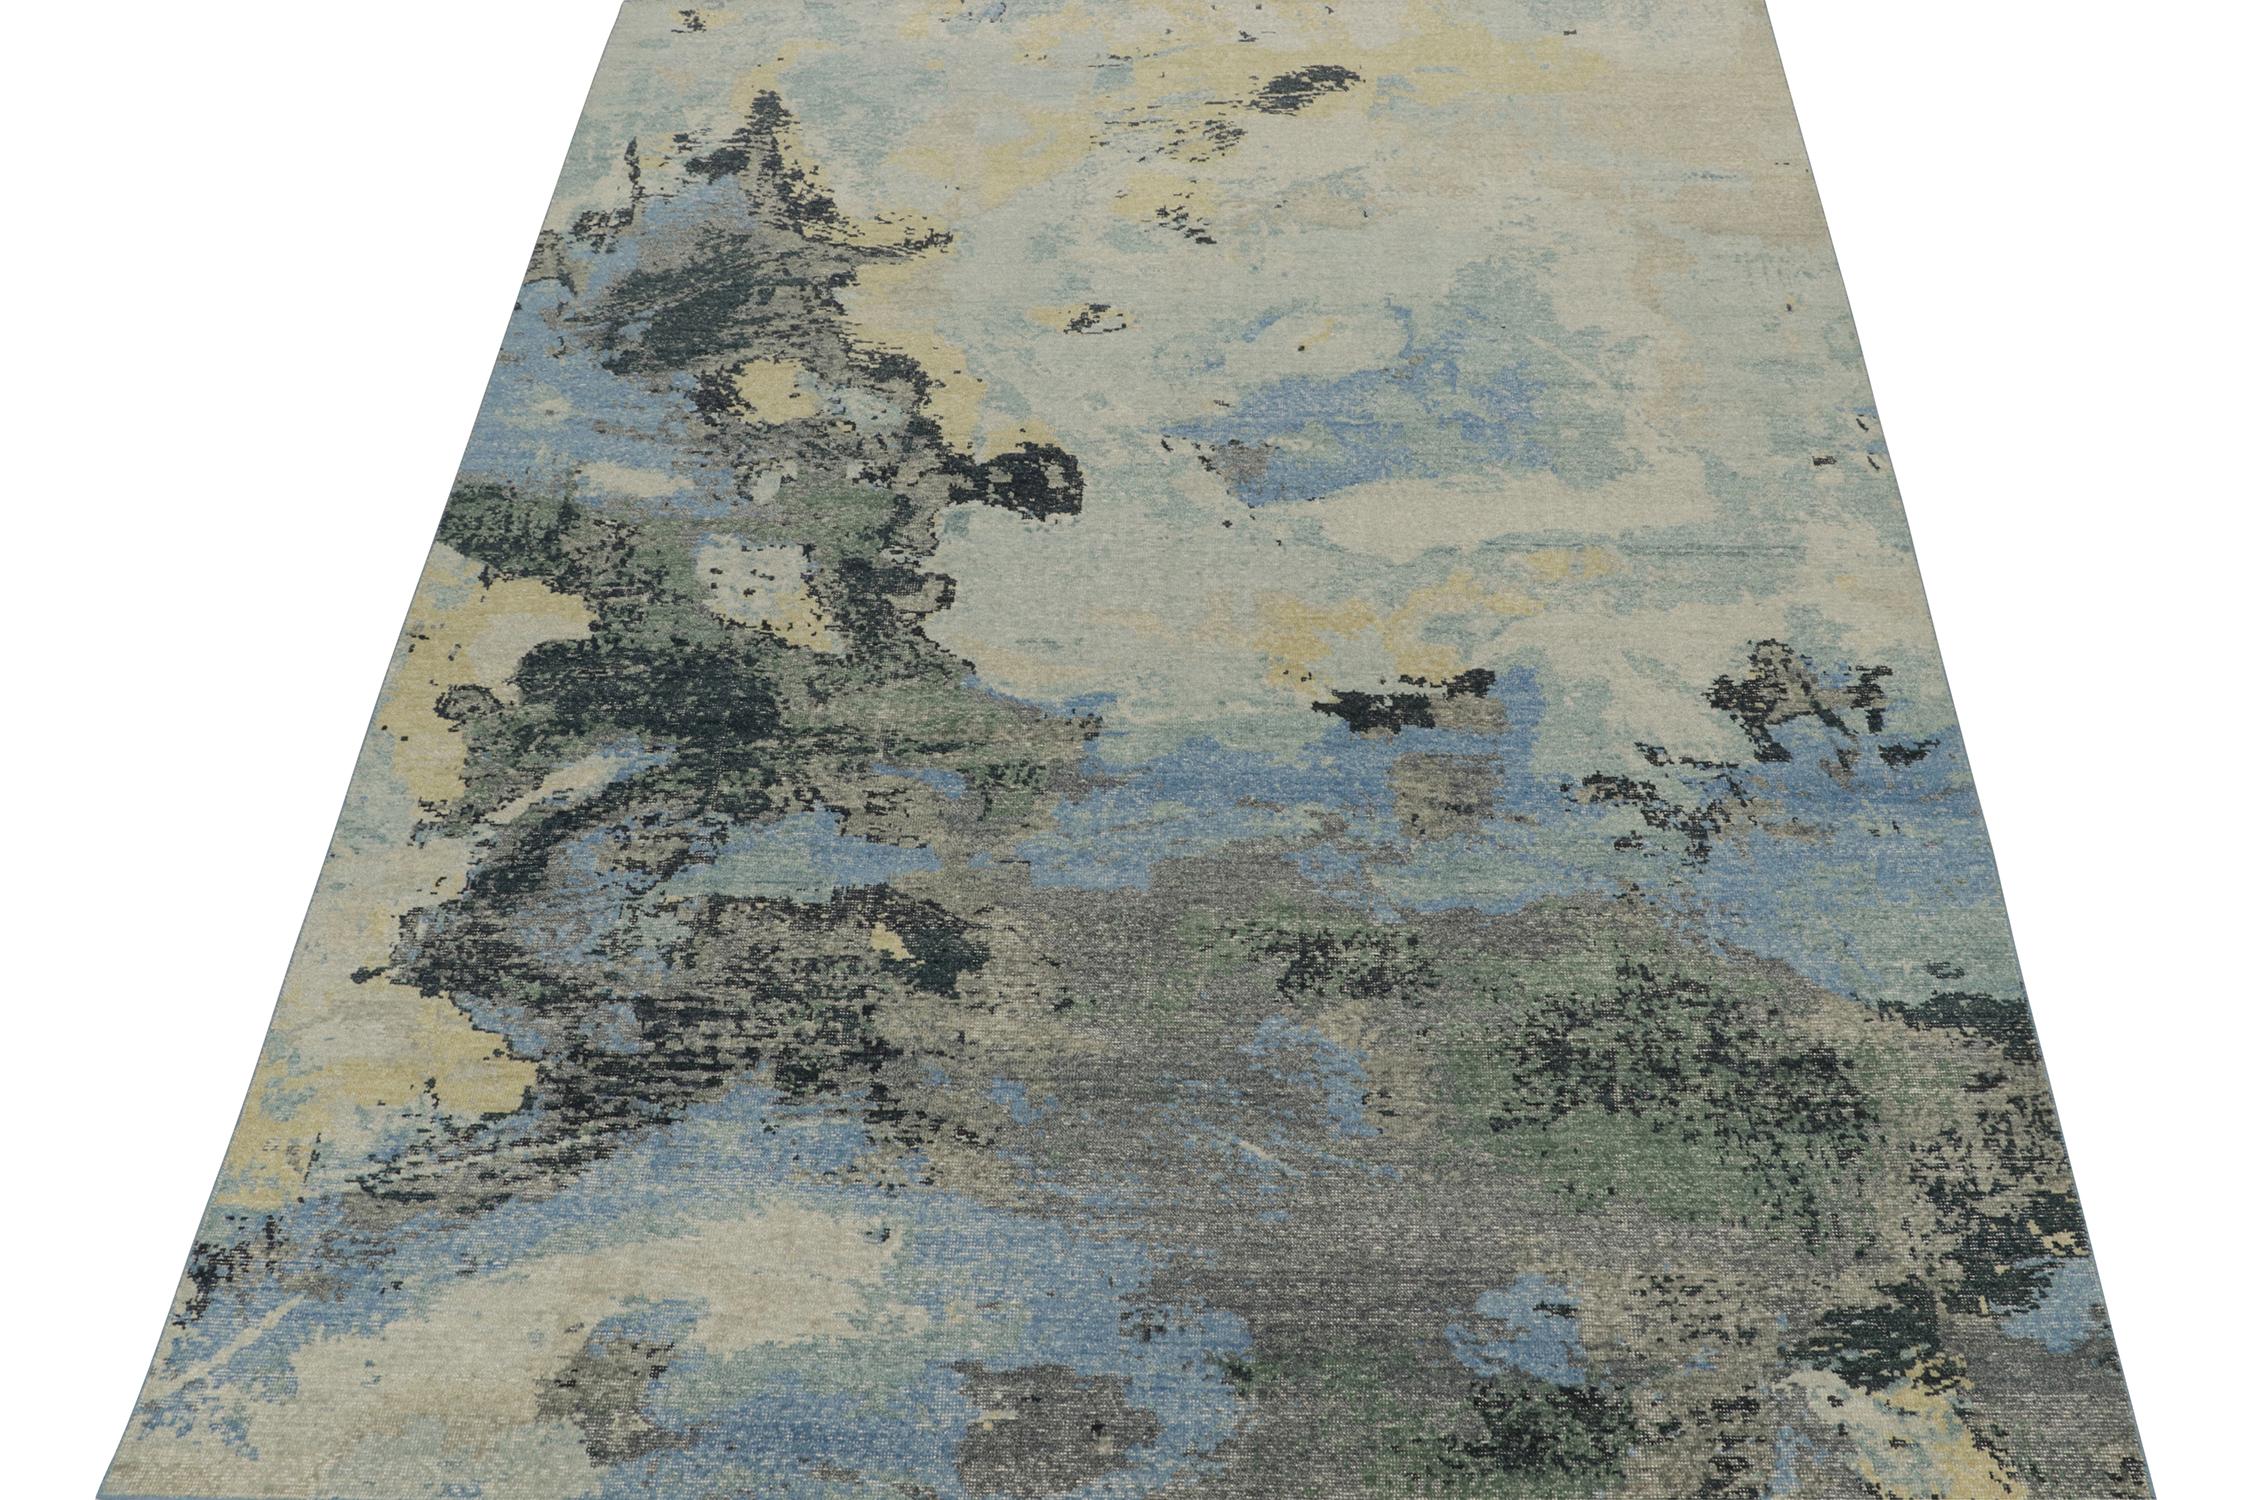 This contemporary 9x12 abstract rug is a new addition to the Homage Collection by Rug & Kilim.

Further On the Design:

Hand-knotted in wool and cotton, this design evokes a fluid play blue, charcoal, and beige paint strokes. Keen eyes might see a